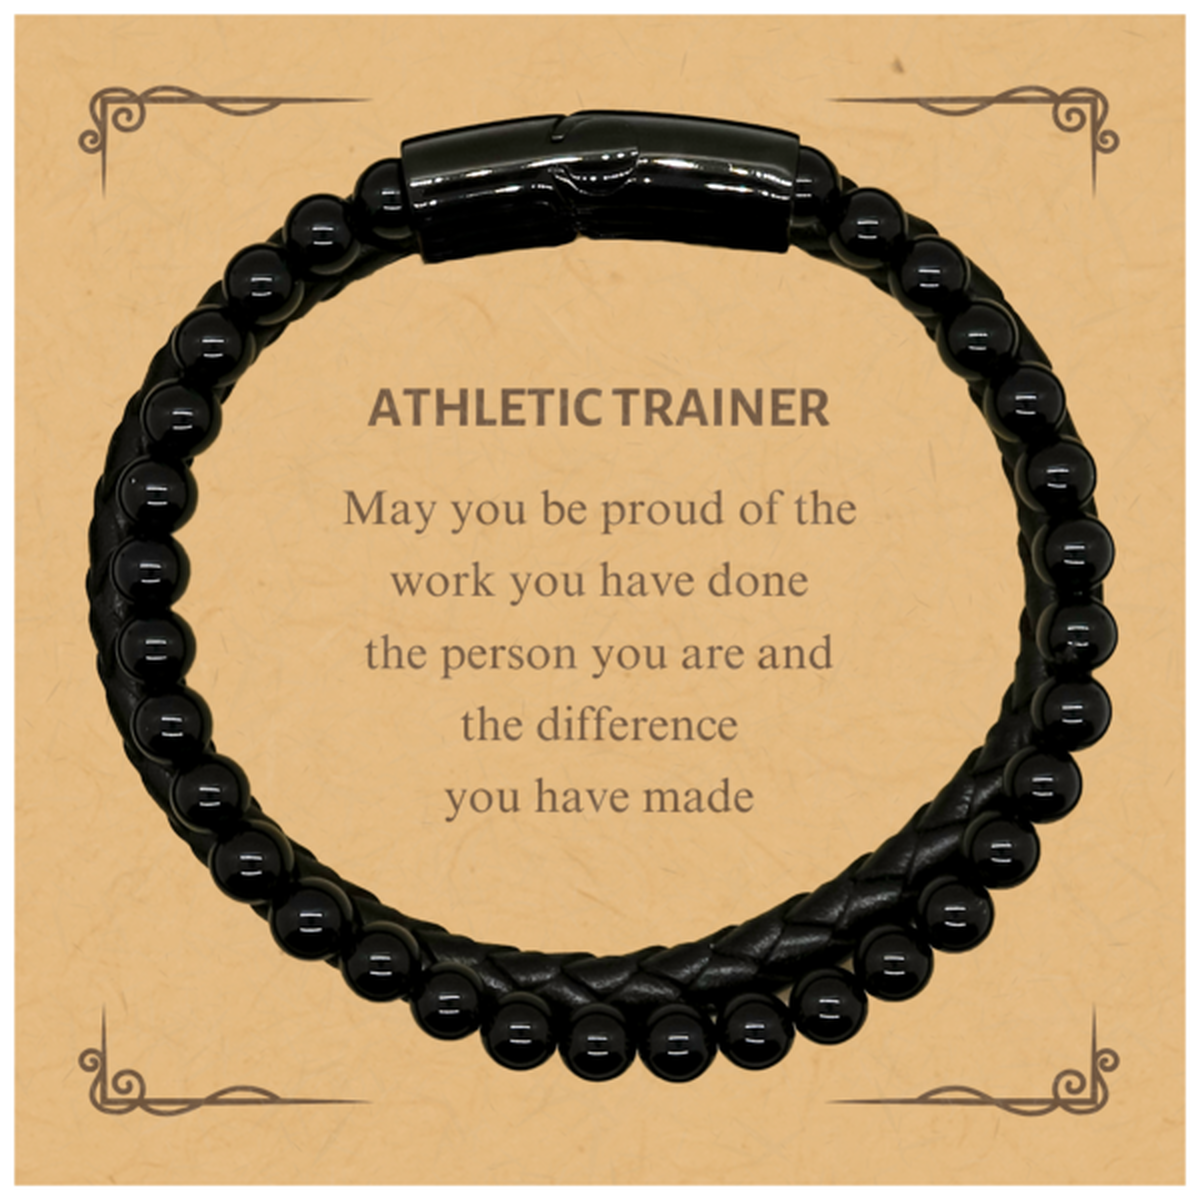 Athletic Trainer May you be proud of the work you have done, Retirement Athletic Trainer Stone Leather Bracelets for Colleague Appreciation Gifts Amazing for Athletic Trainer